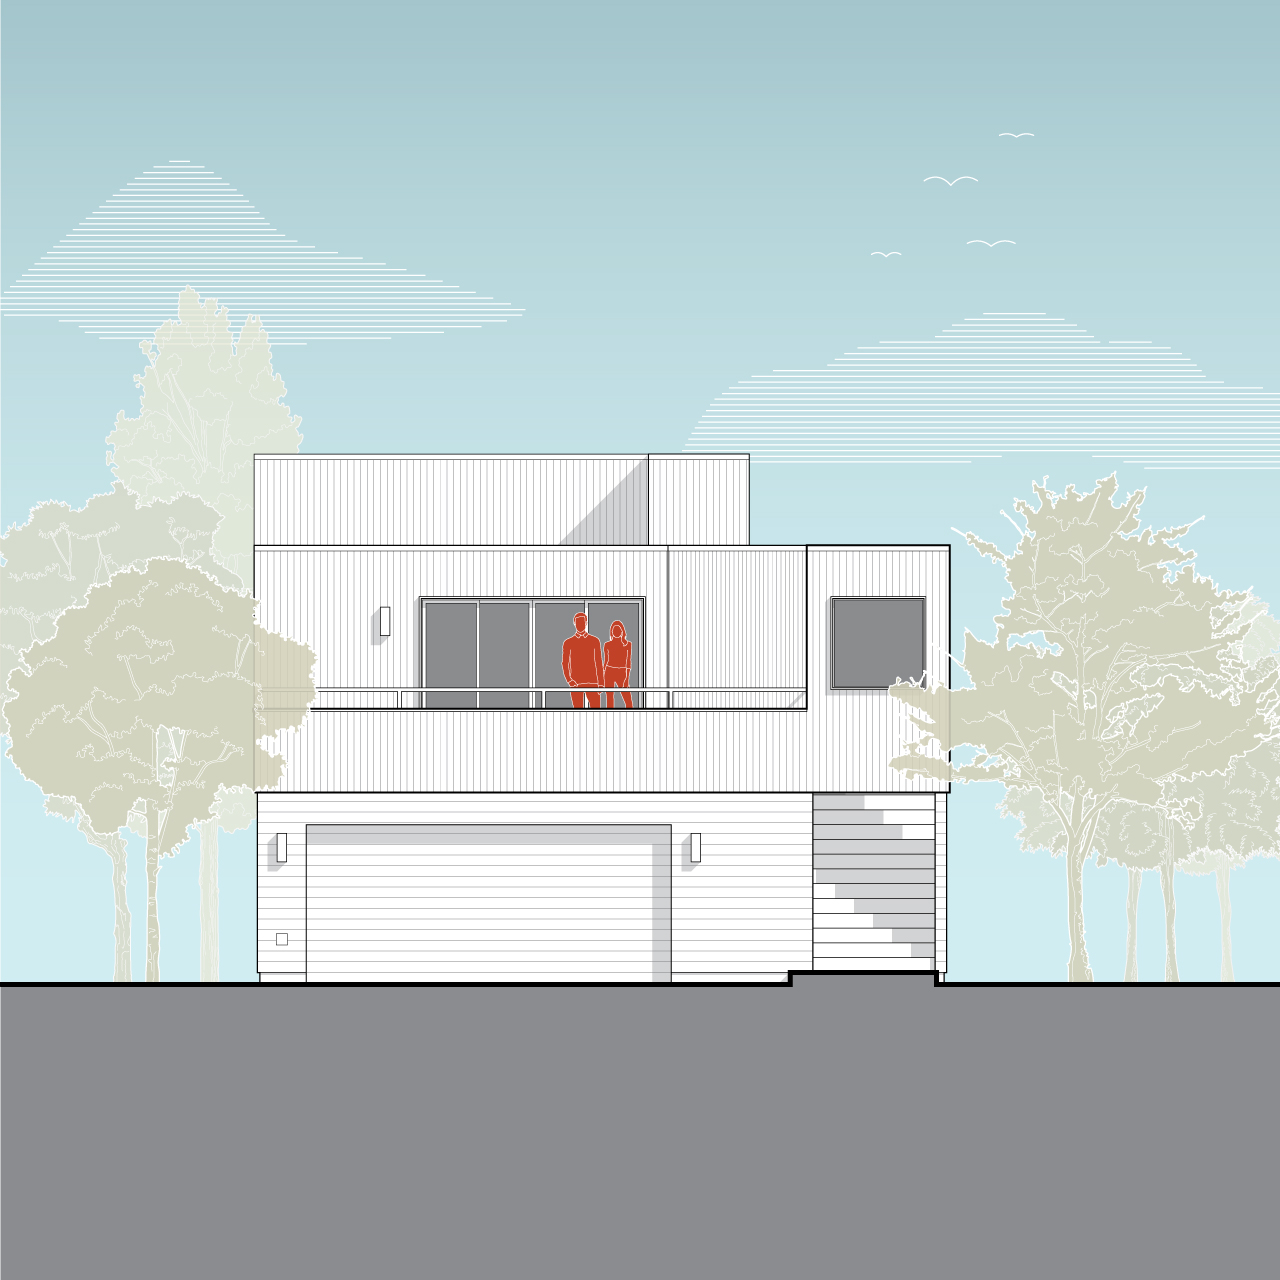 This is a drawing of the front elevation of the Hayden Island Facelift after renovations.